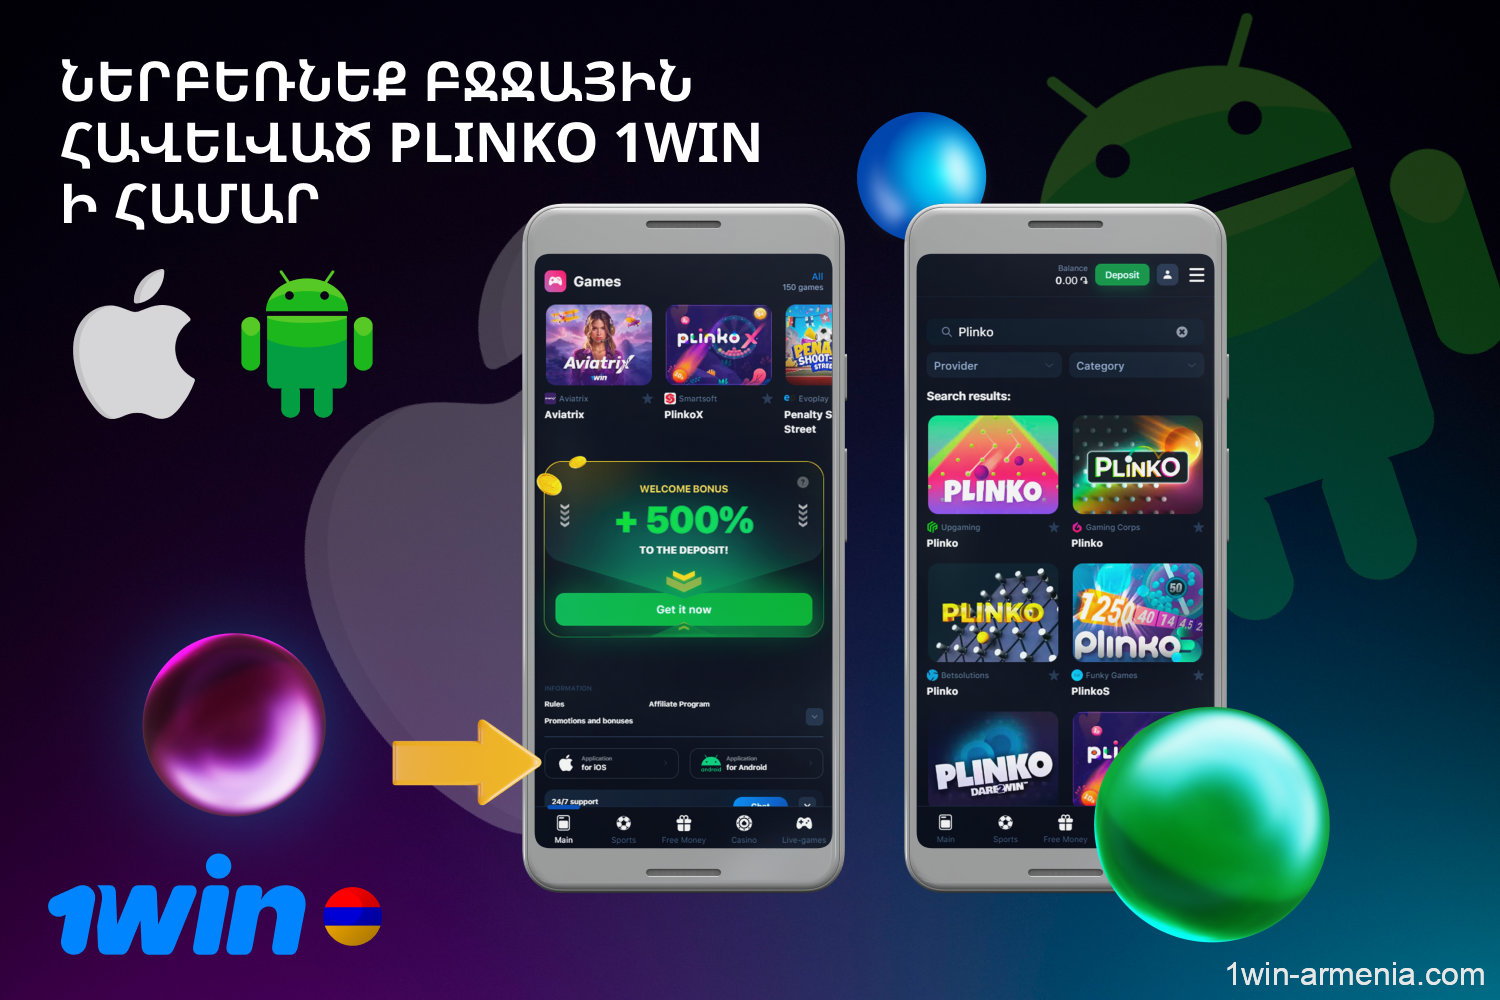 Players from Armenia can place bets and play Plinko for free via the 1win mobile app